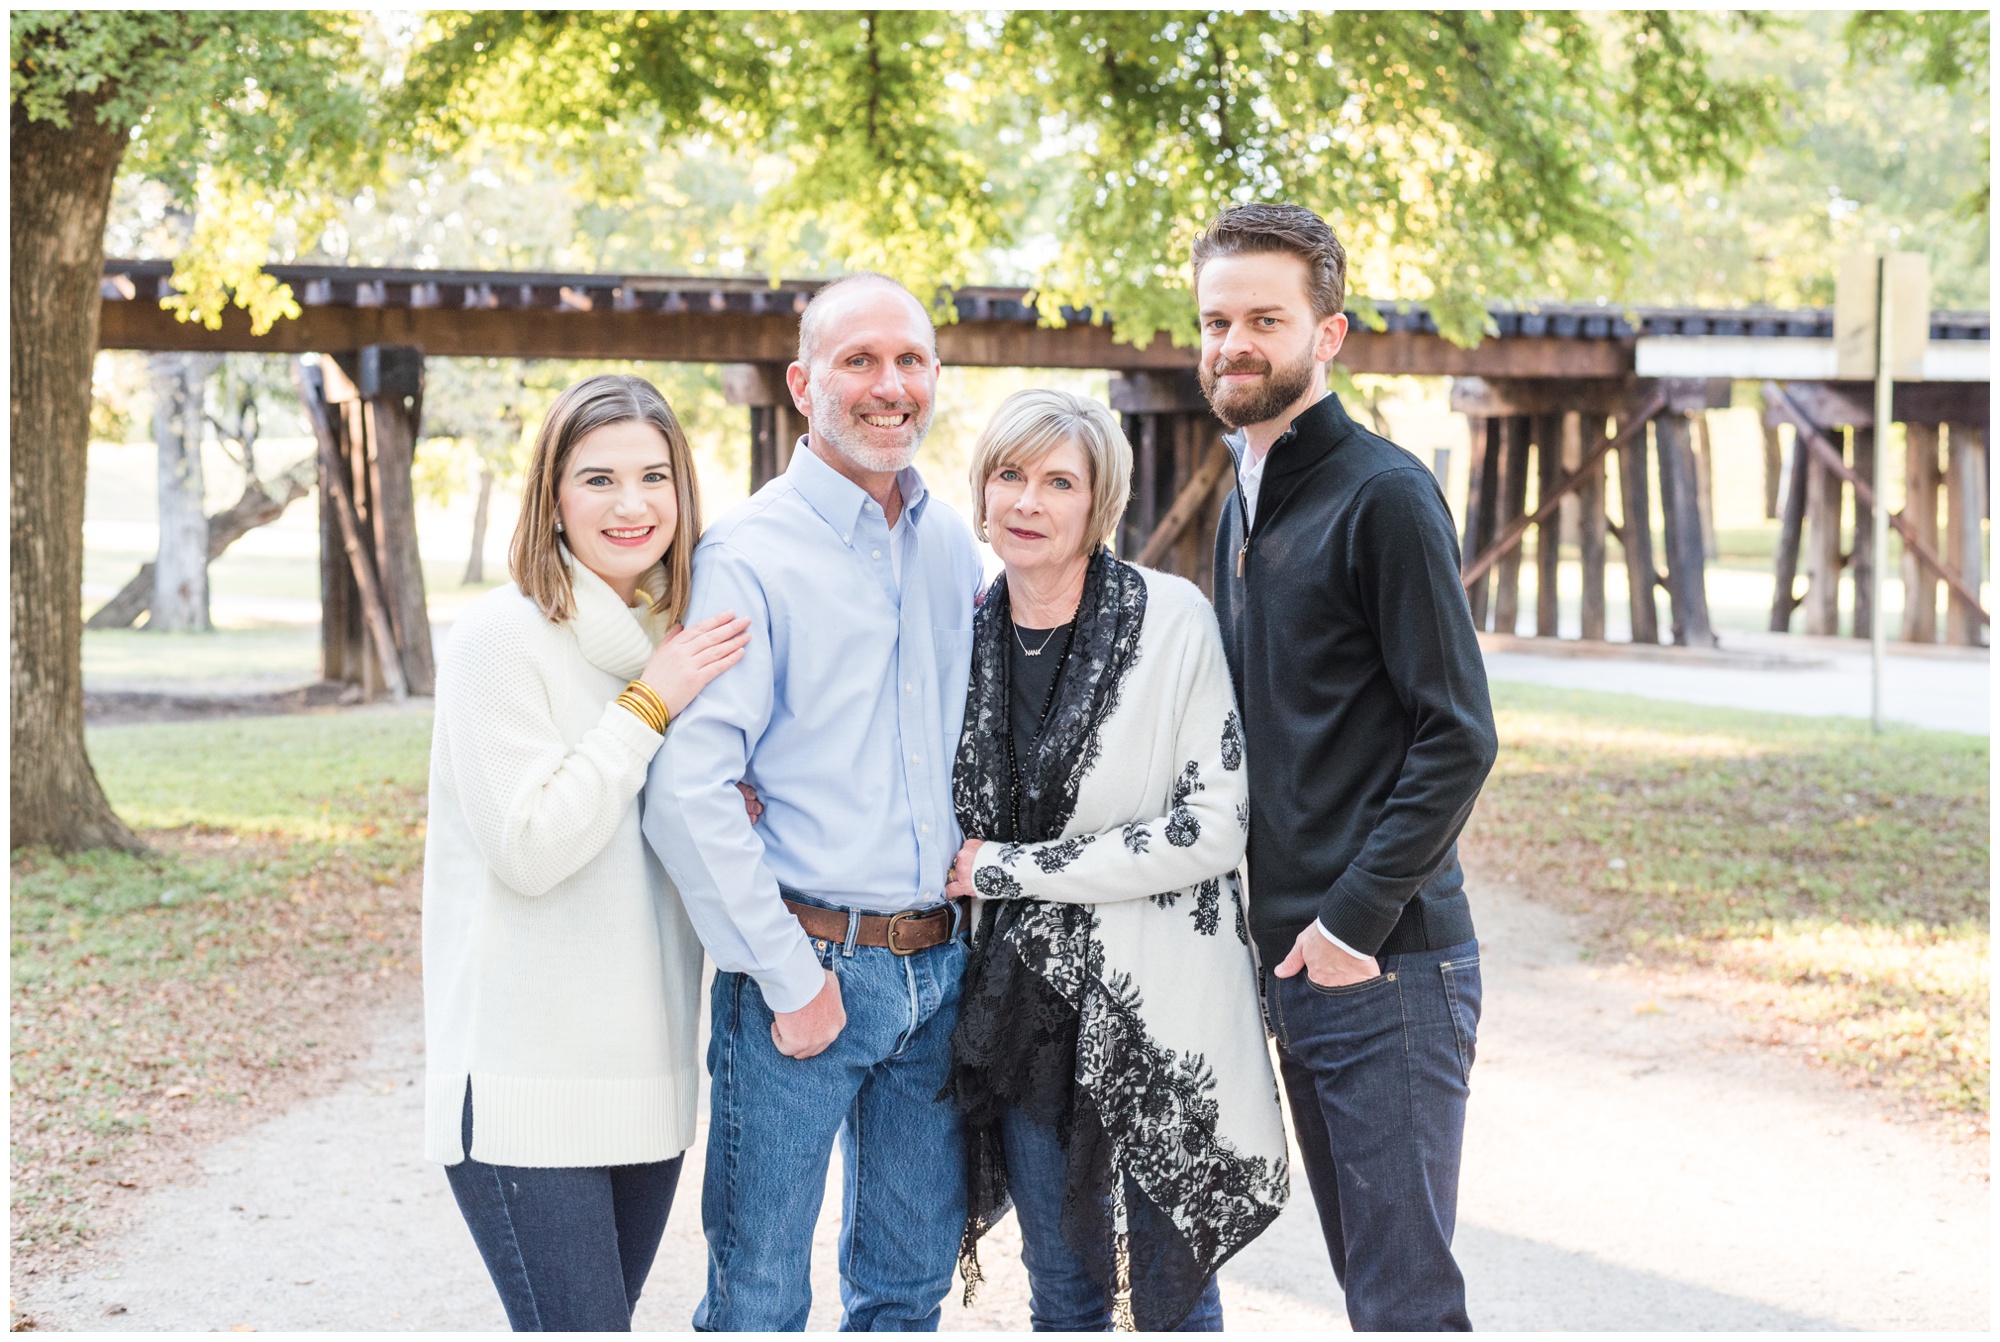 Trinity Park Family Session | Fort Worth Family Photographer | Fort Worth Photographer | Lauren Grimes Photography